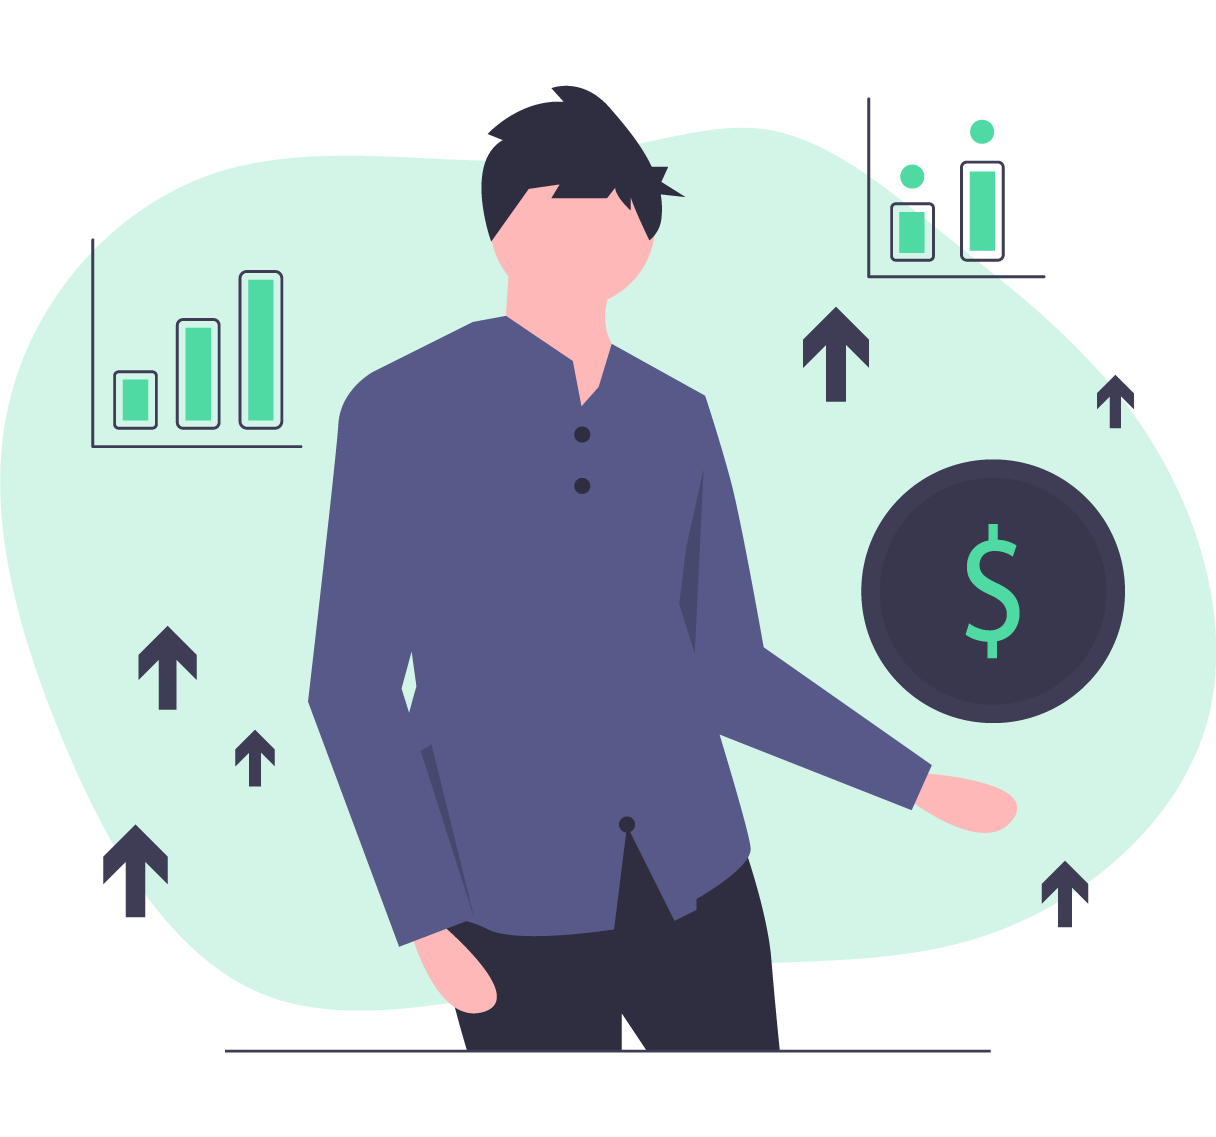 Guy holding money symbol with data in background